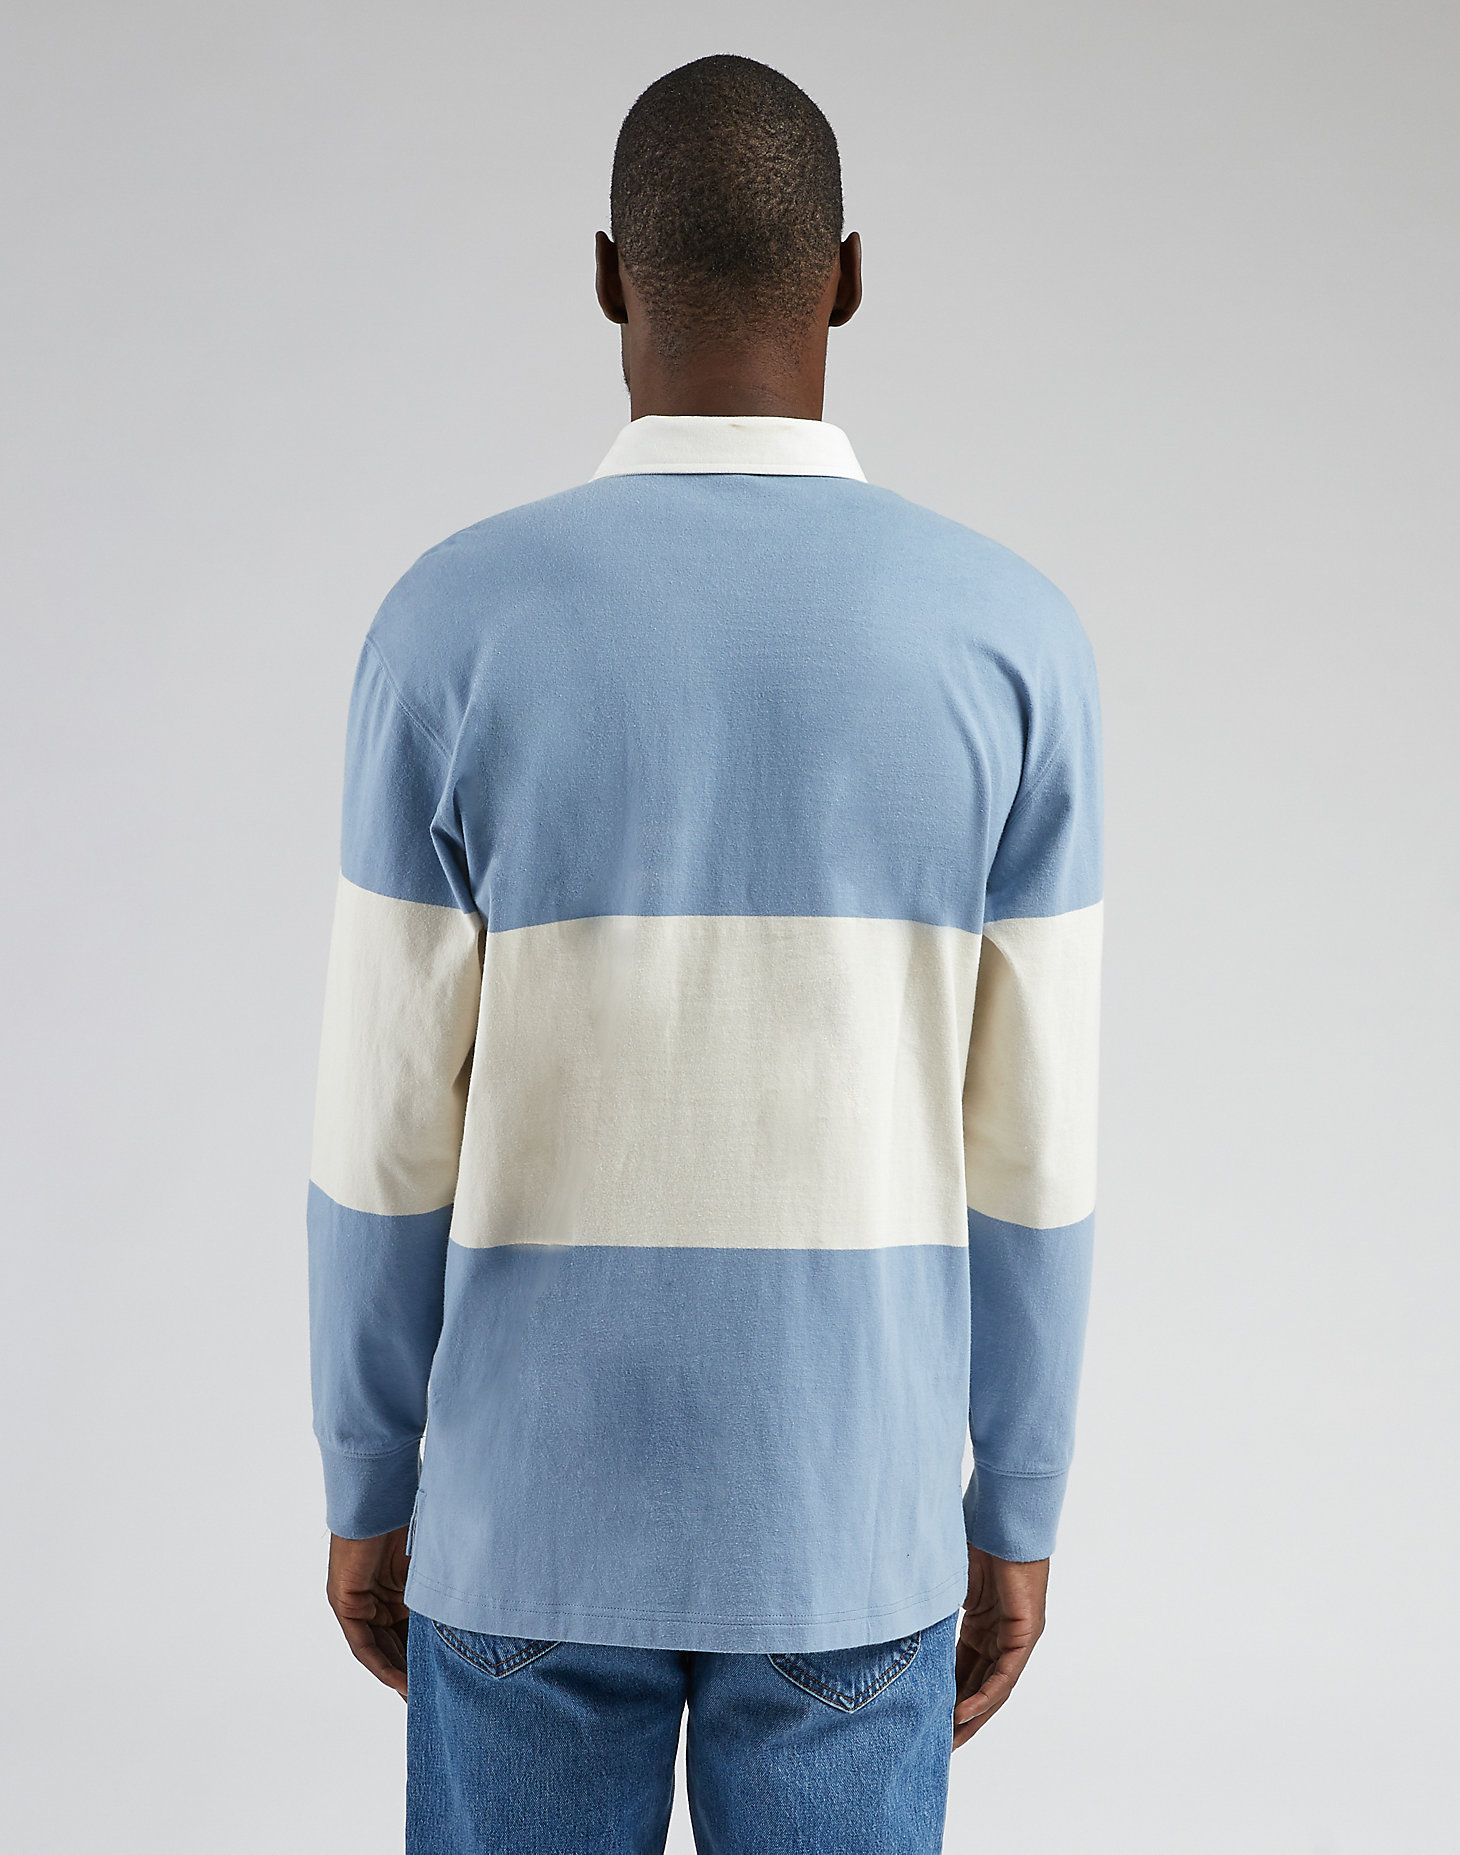 Long Sleeve Rugby Tee in Dreamy Blue alternative view 1